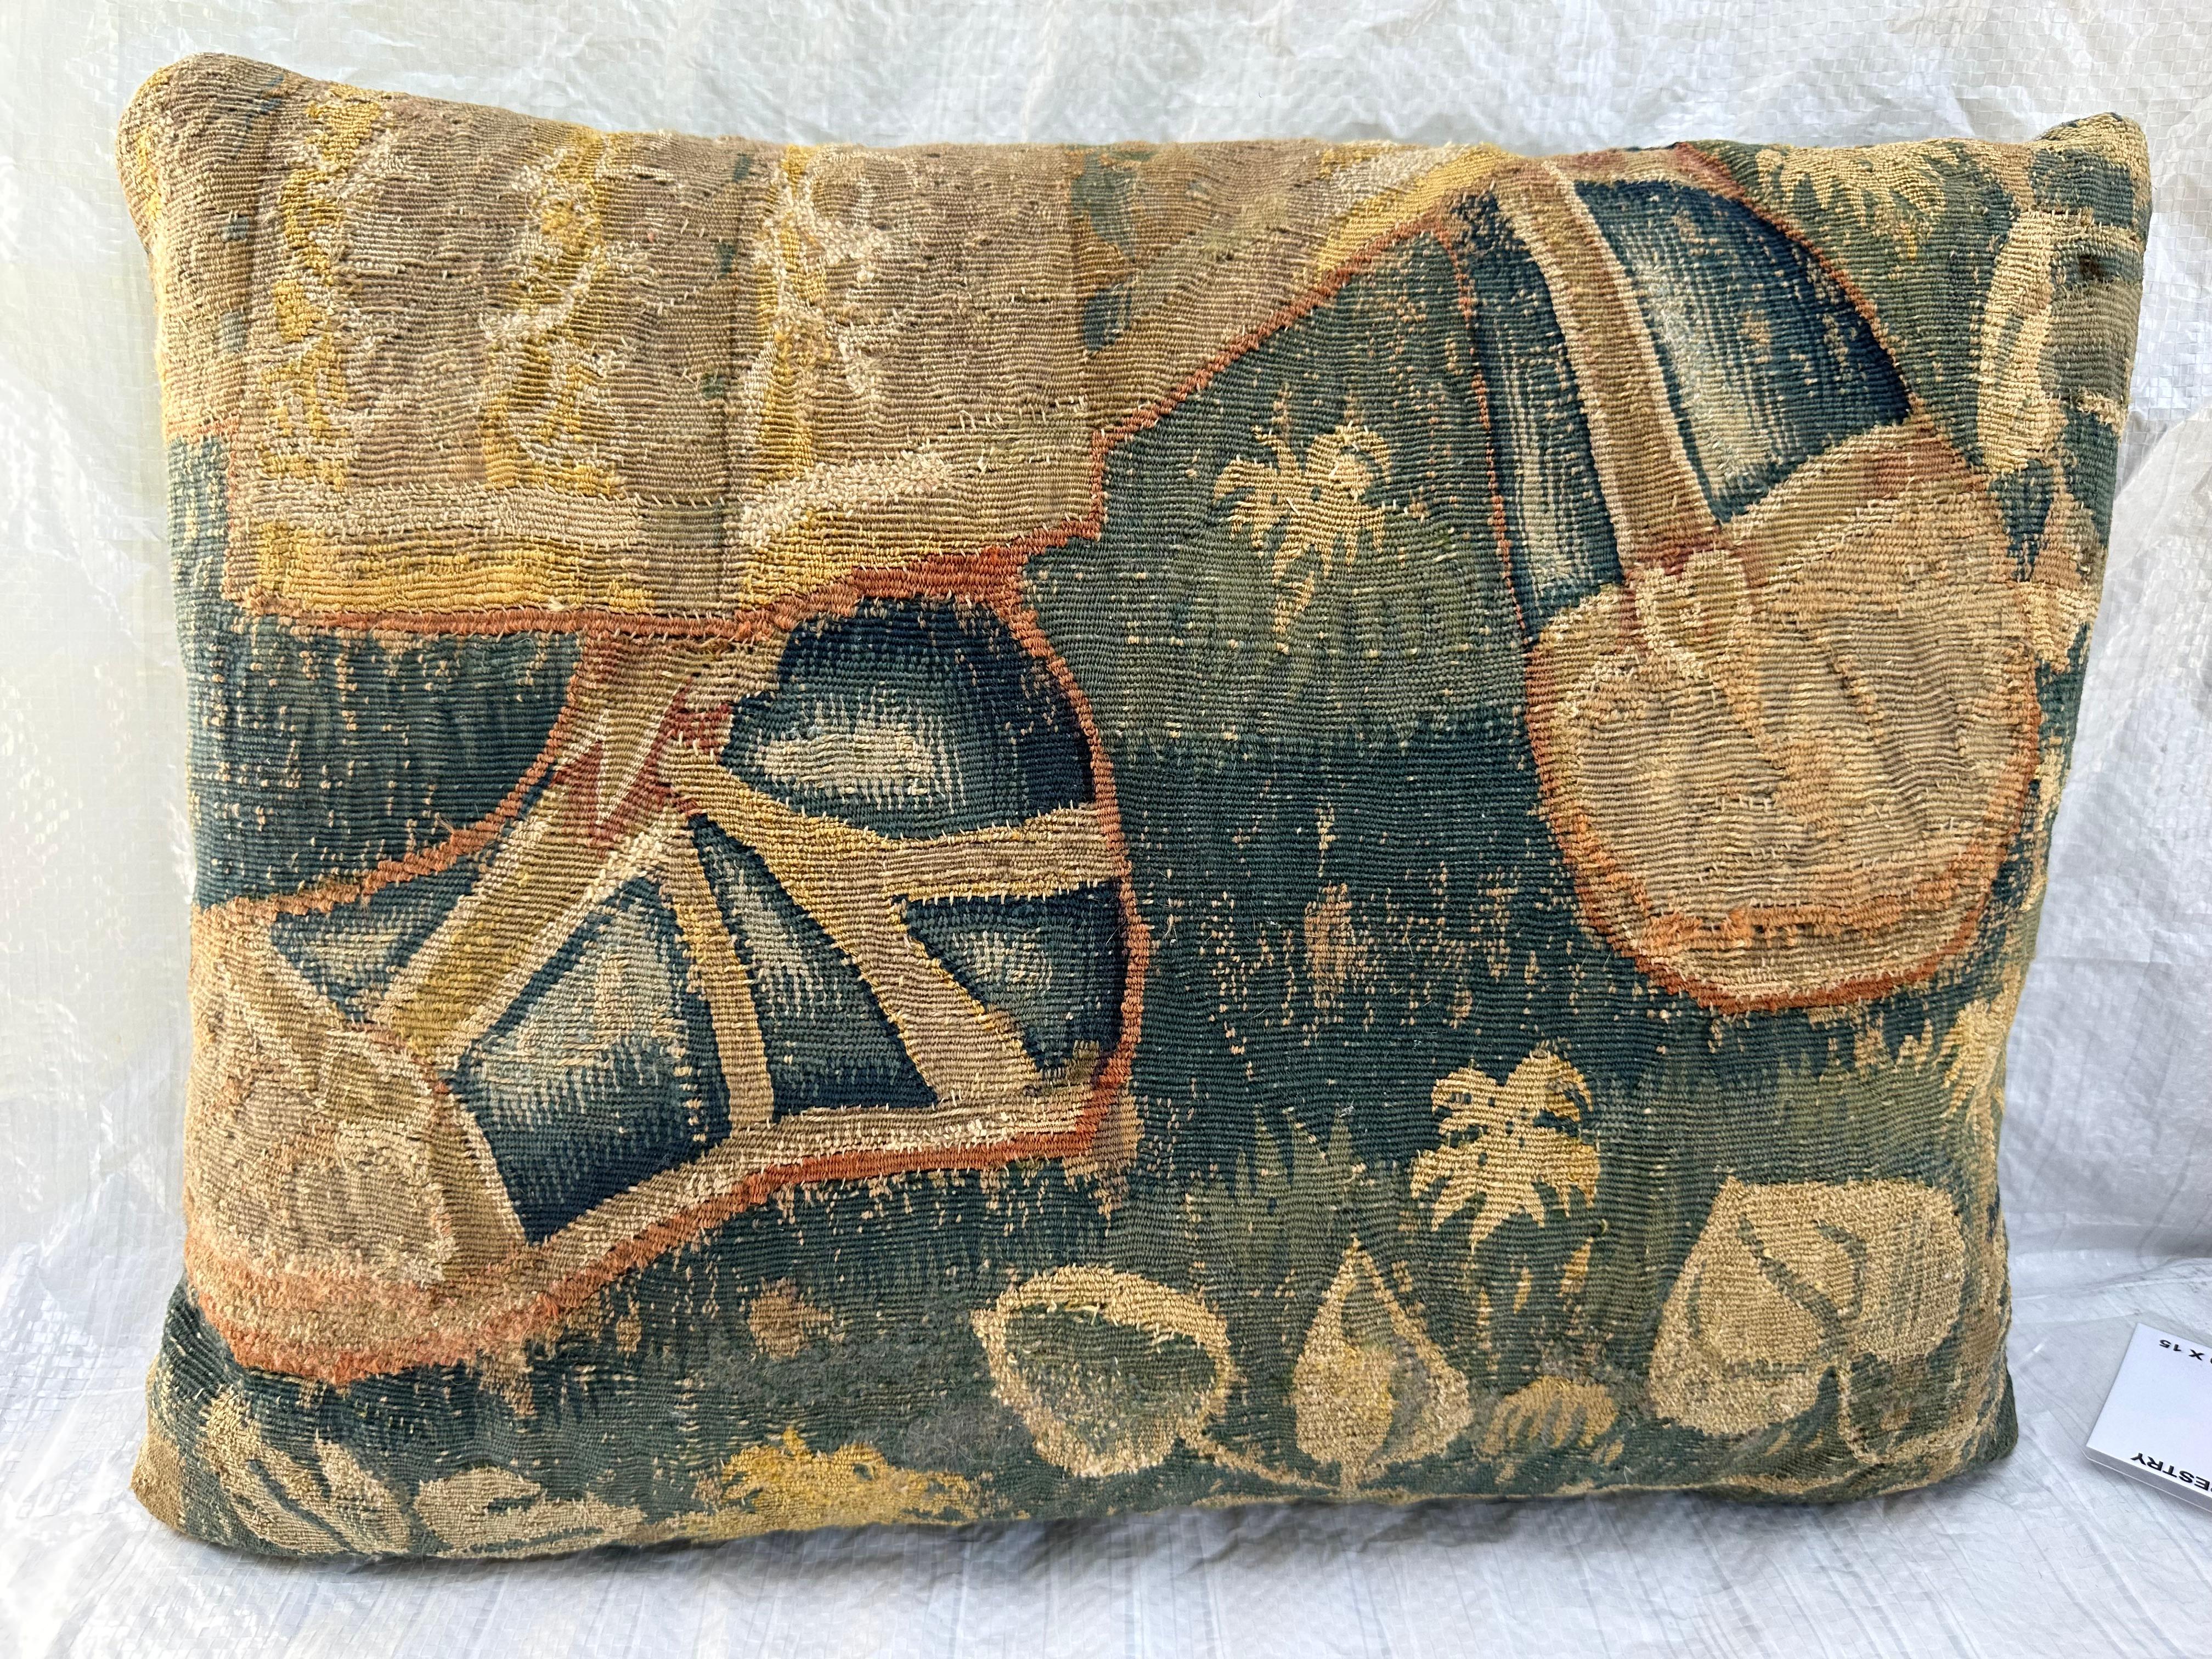 Belgian Mid-16th Century Brussels Tapestry Pillow For Sale